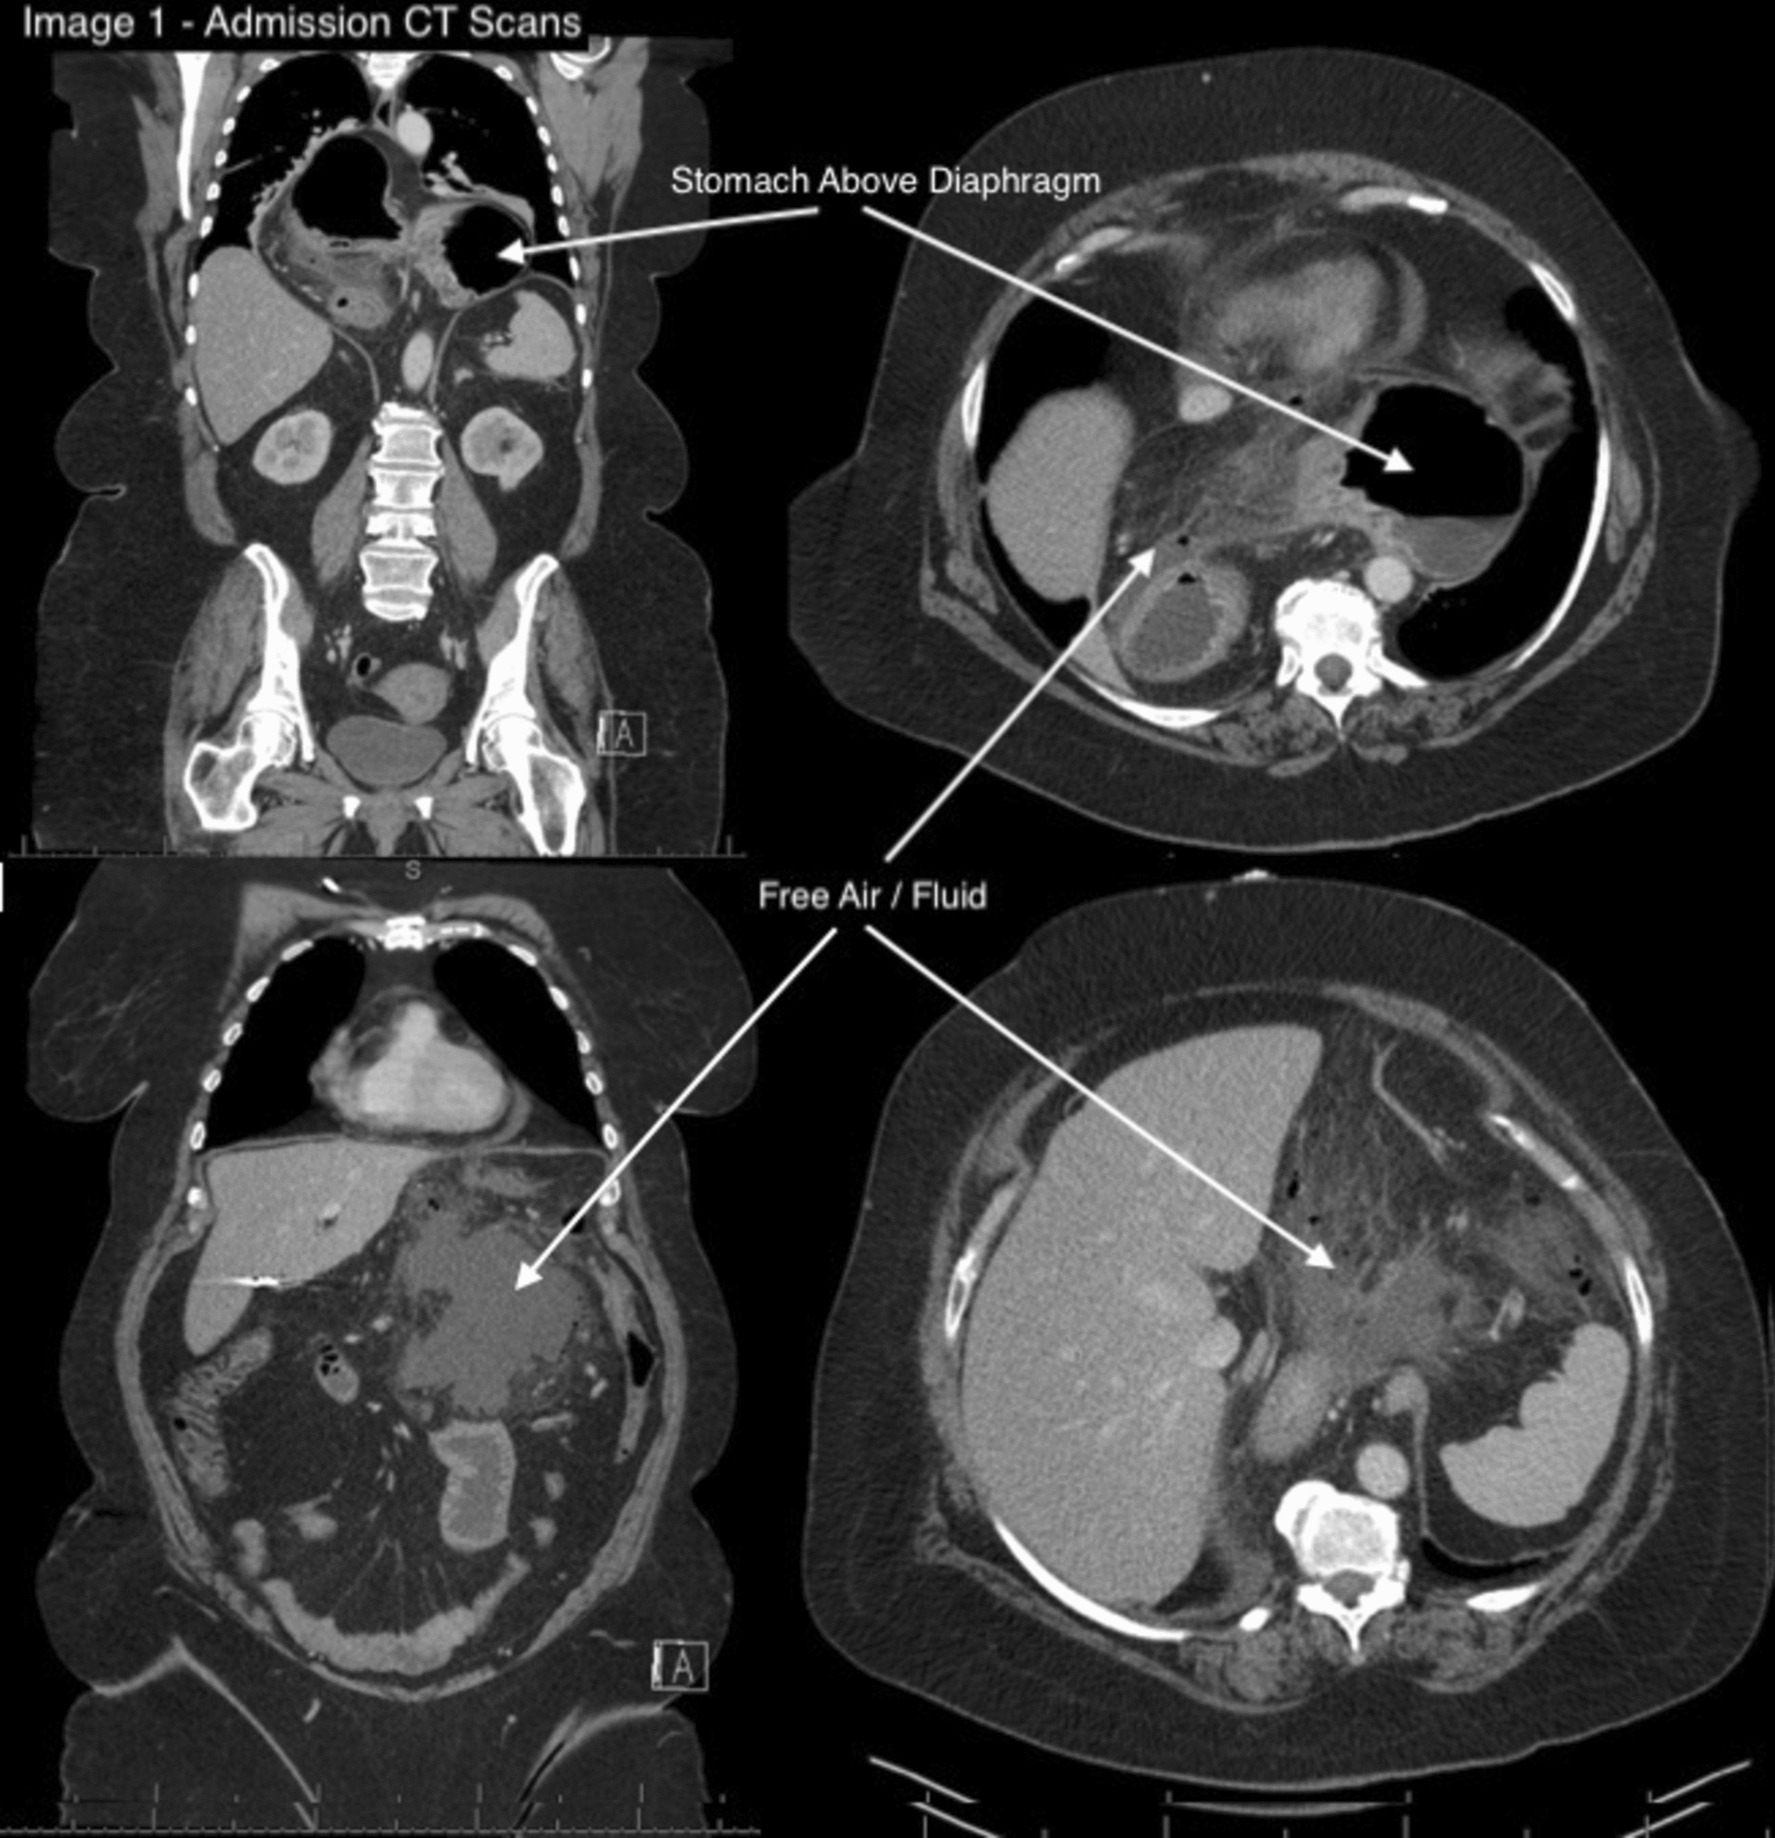 Successful Surgical Management of a Perforated Duodenal Ulcer Within an Incarcerated Paraesophageal Hernia